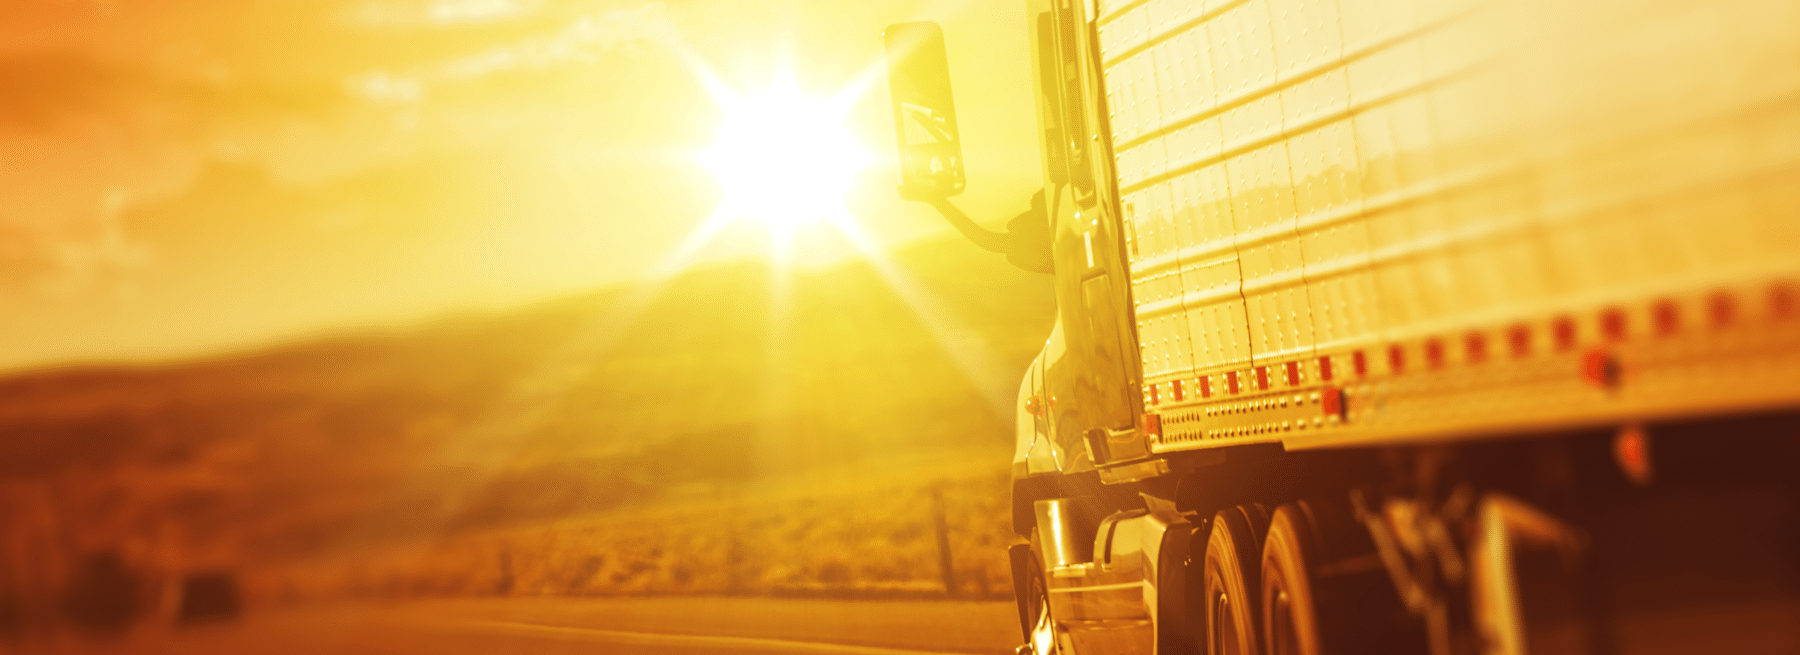 Enhance your trucking business